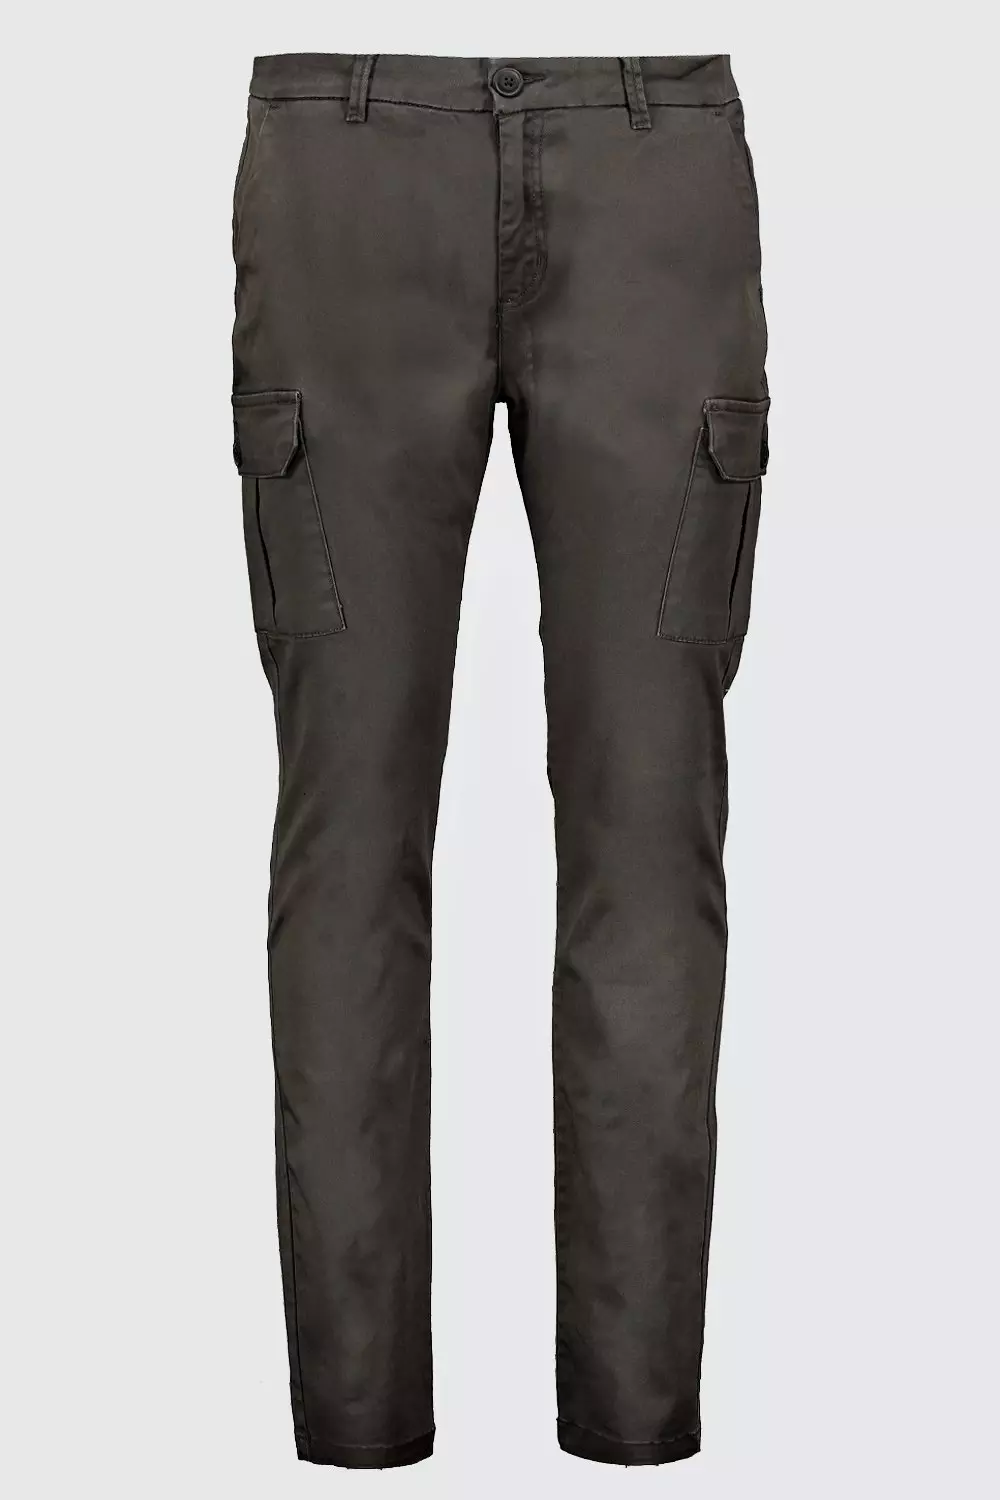 Fixed Waist Relaxed Fit Cargo Chino Pants